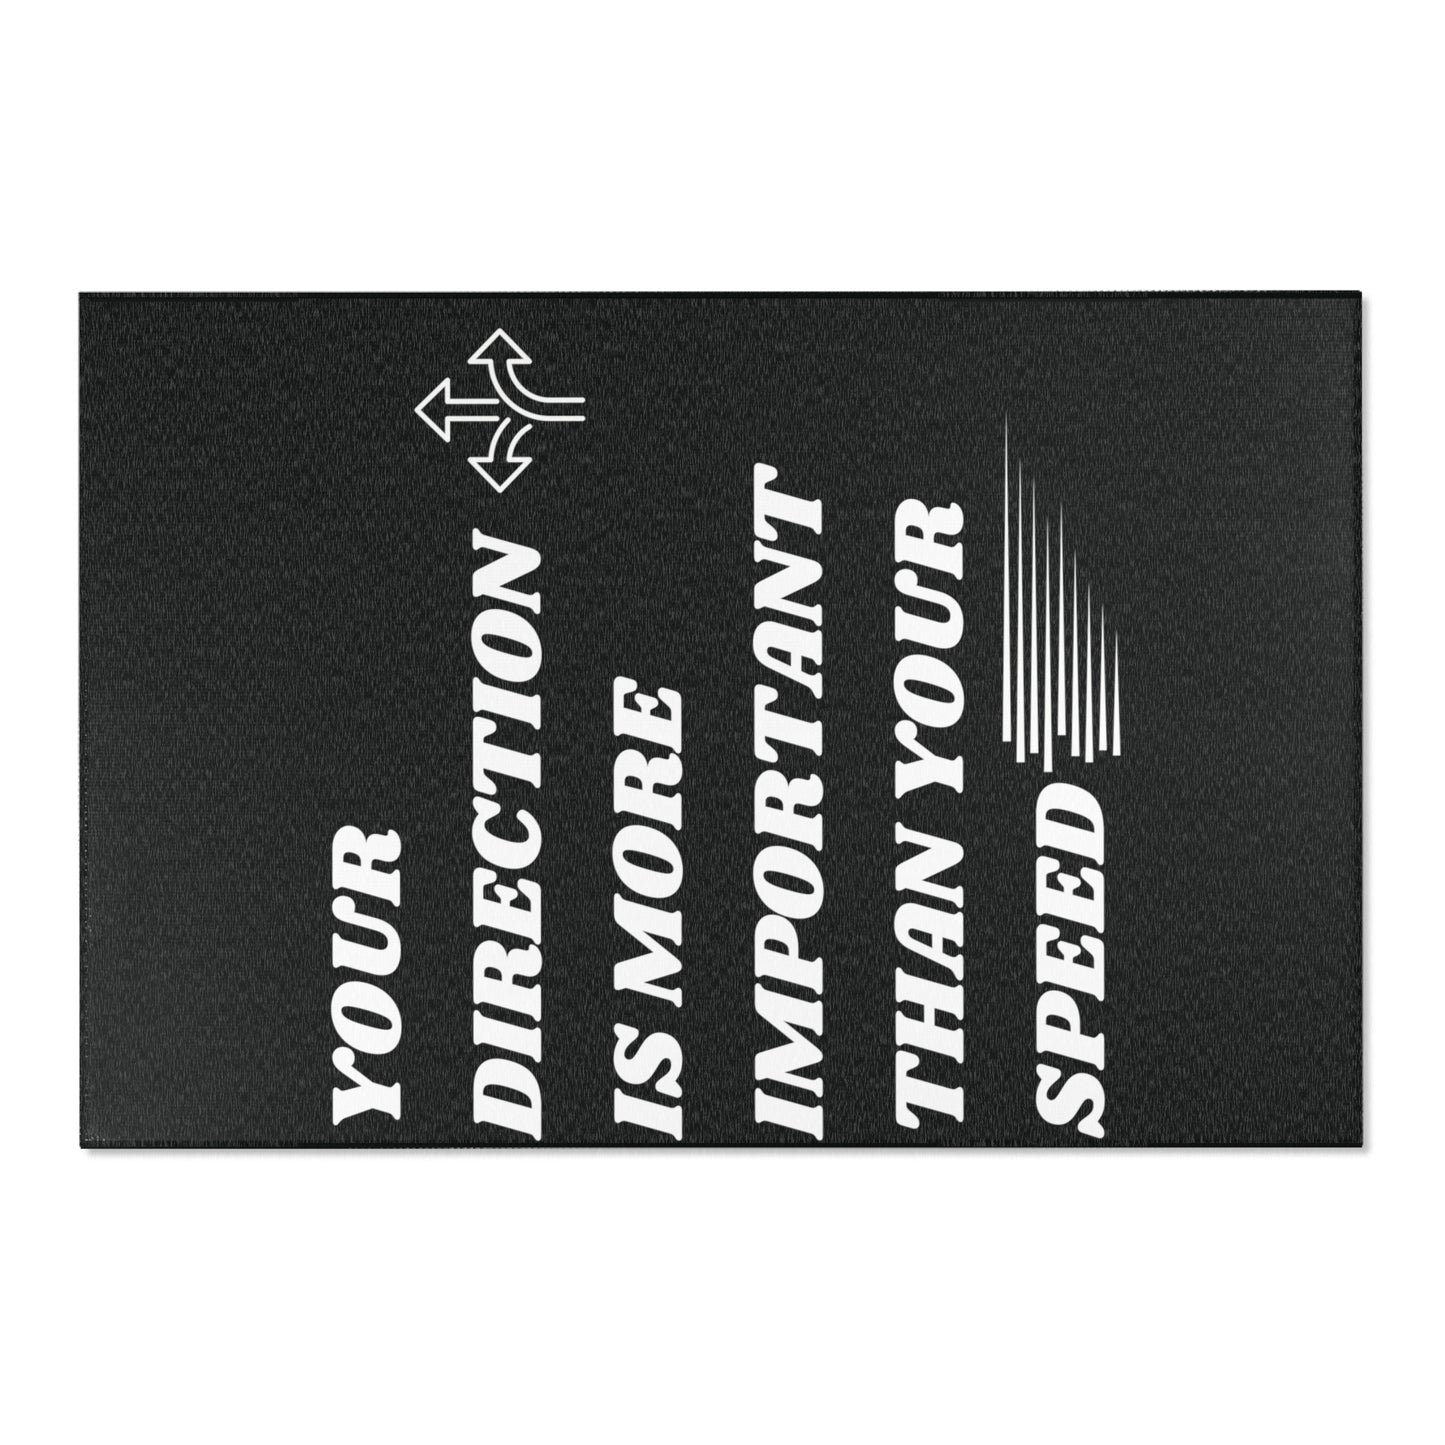 Your Direction Area Rugs